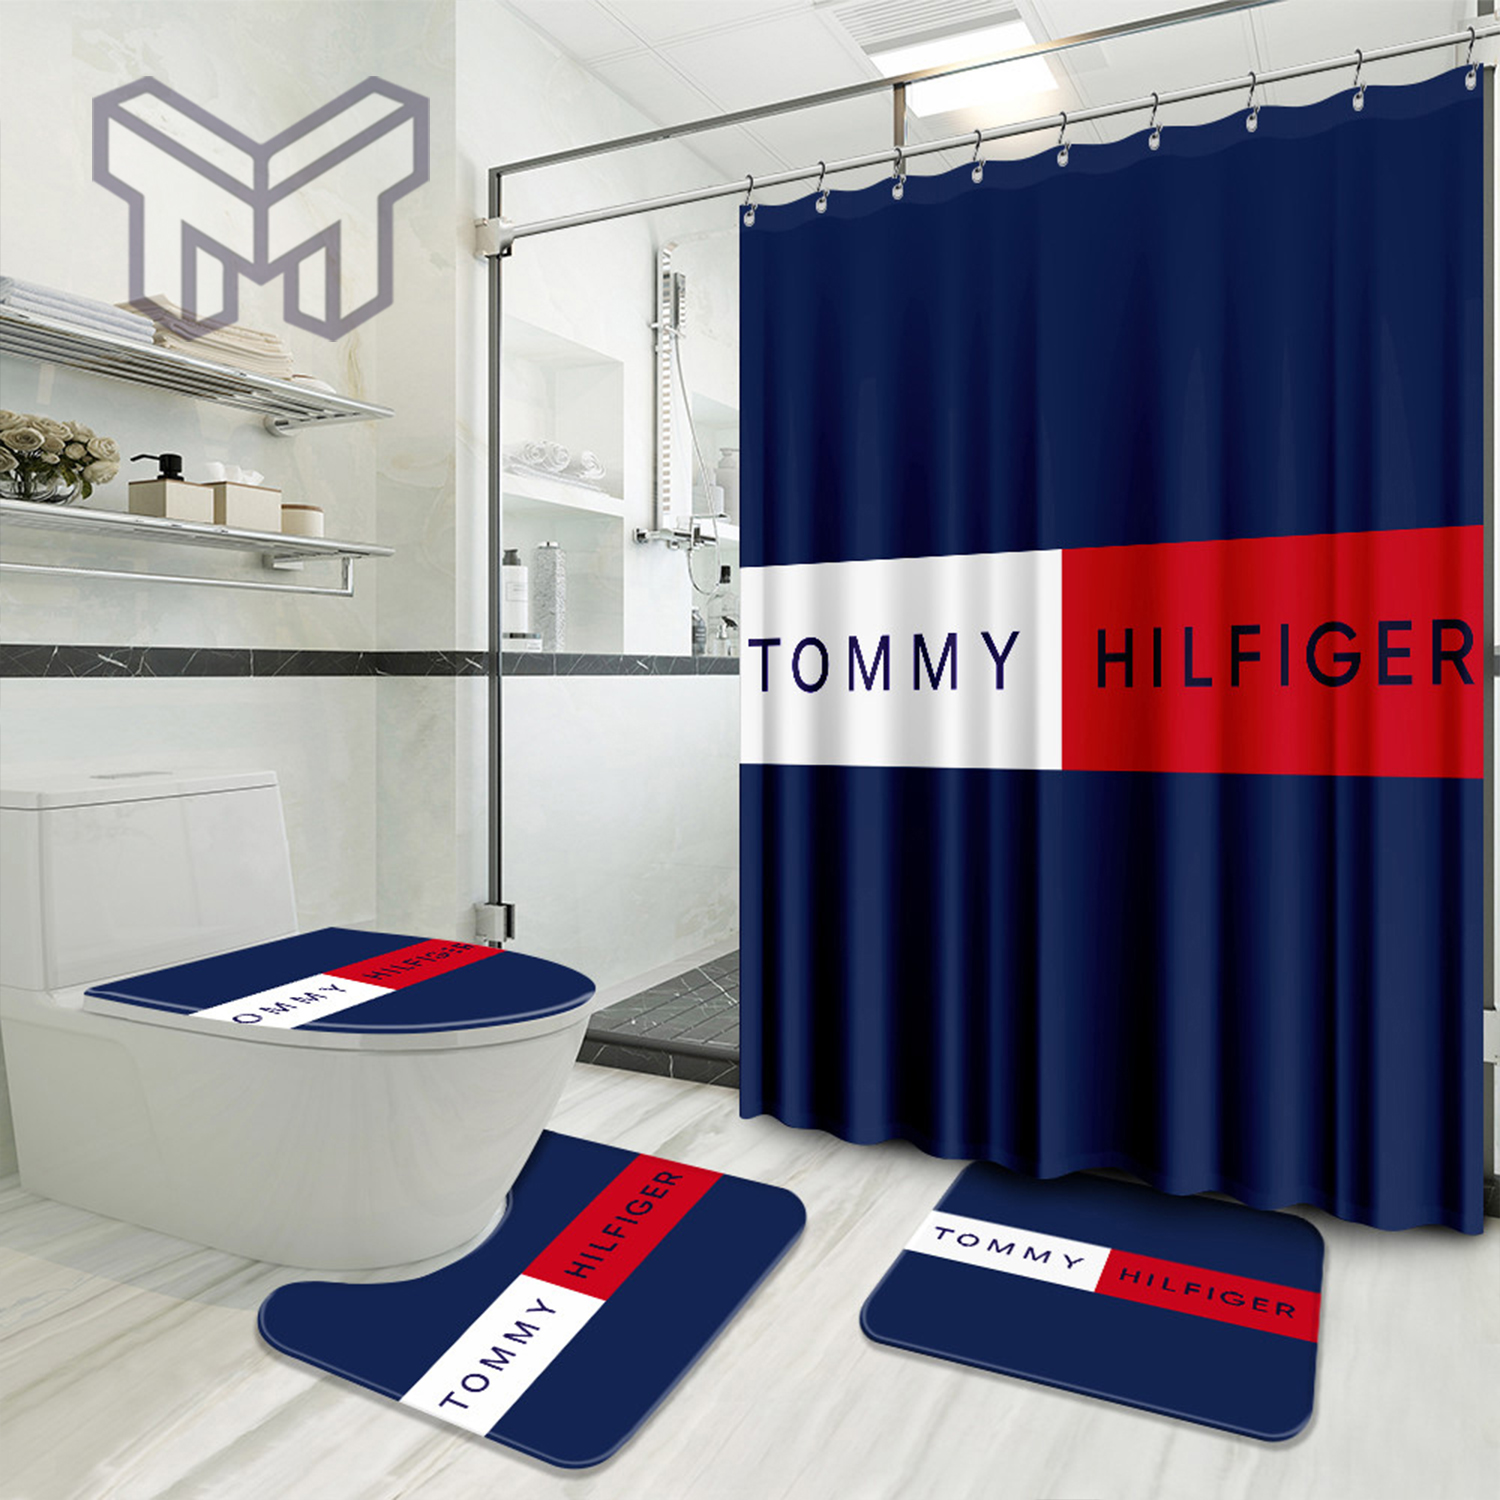 Tommy Hilfiger Brand Preium Bathroom Set With Shower Shower Curtain And Rug Toilet Seat Covers Bathroom Set - Muranotex Store